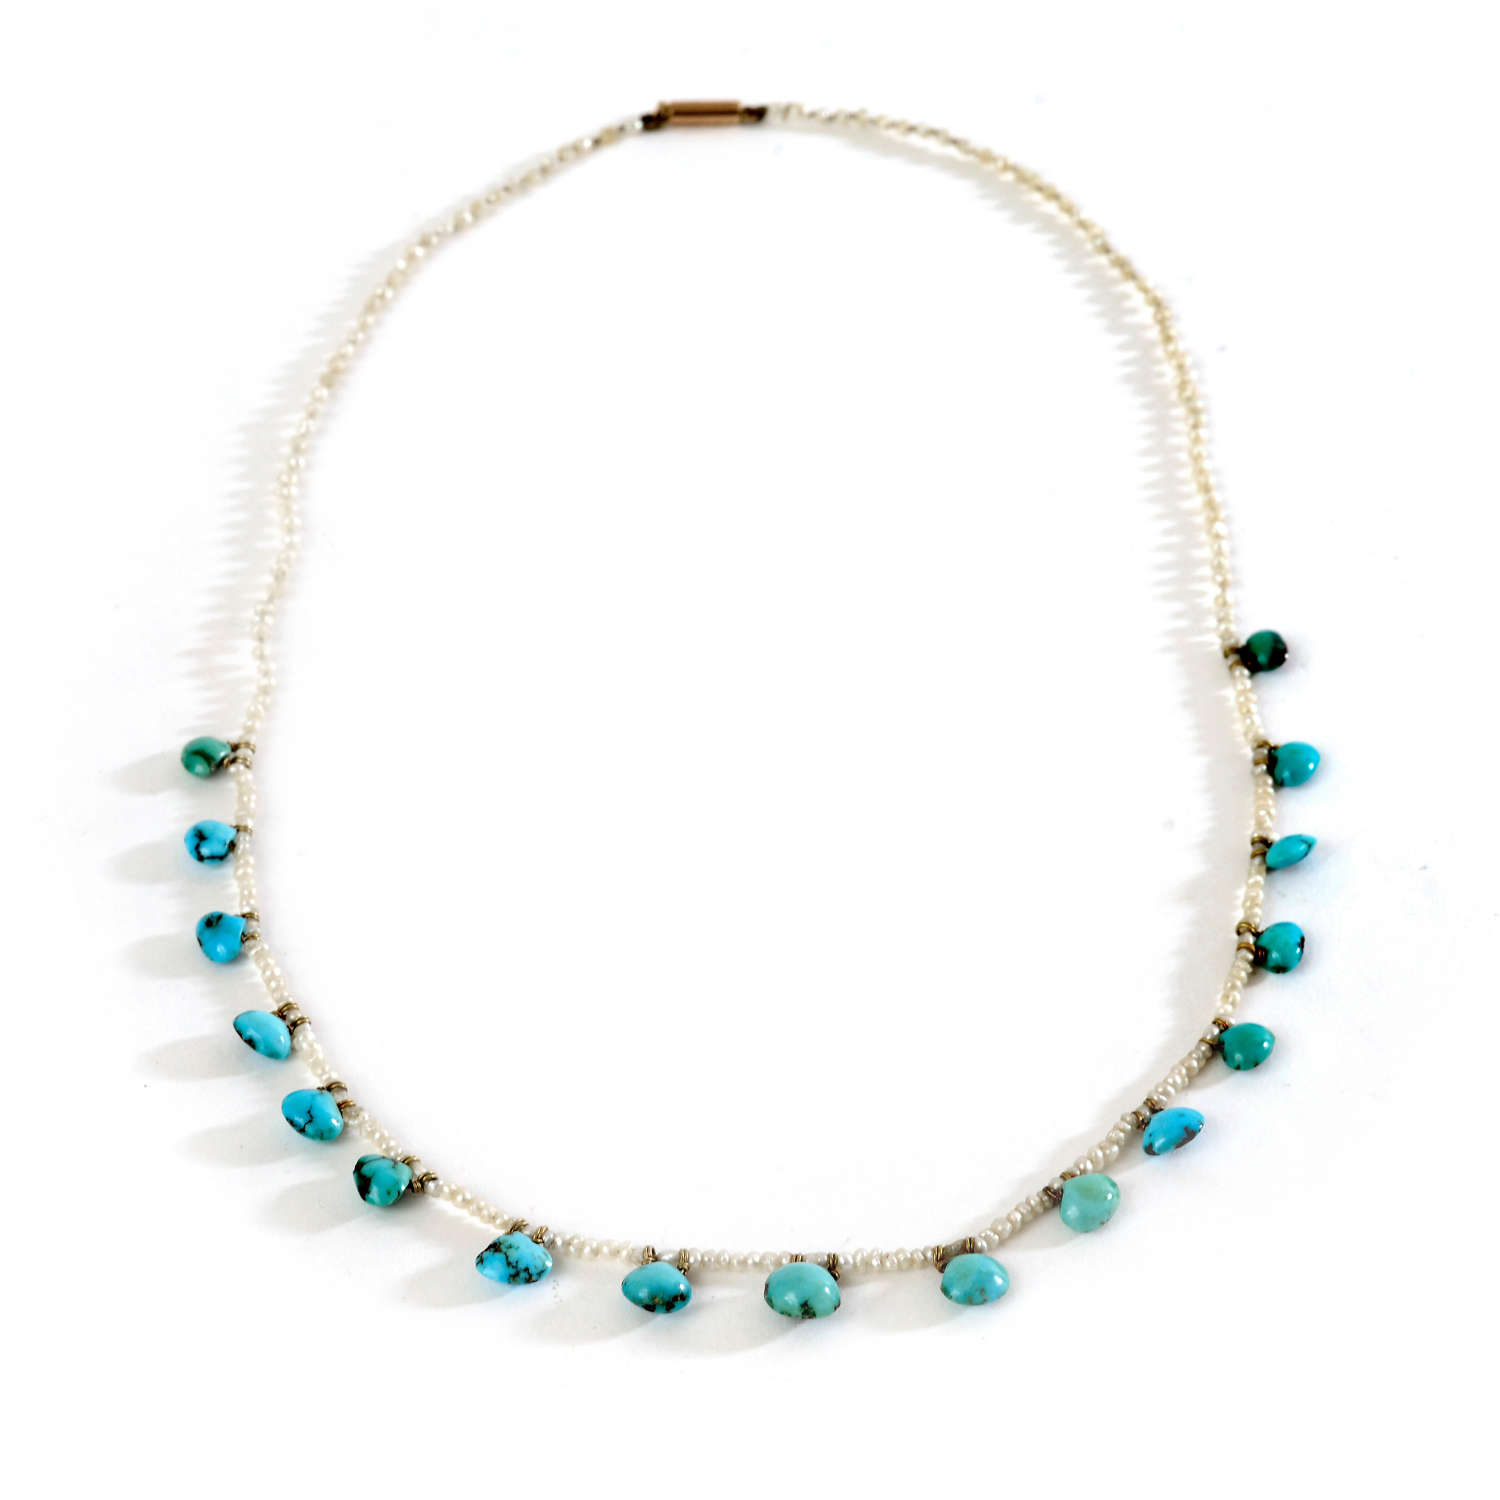 Edwardian turquoise and seed-pearl necklace